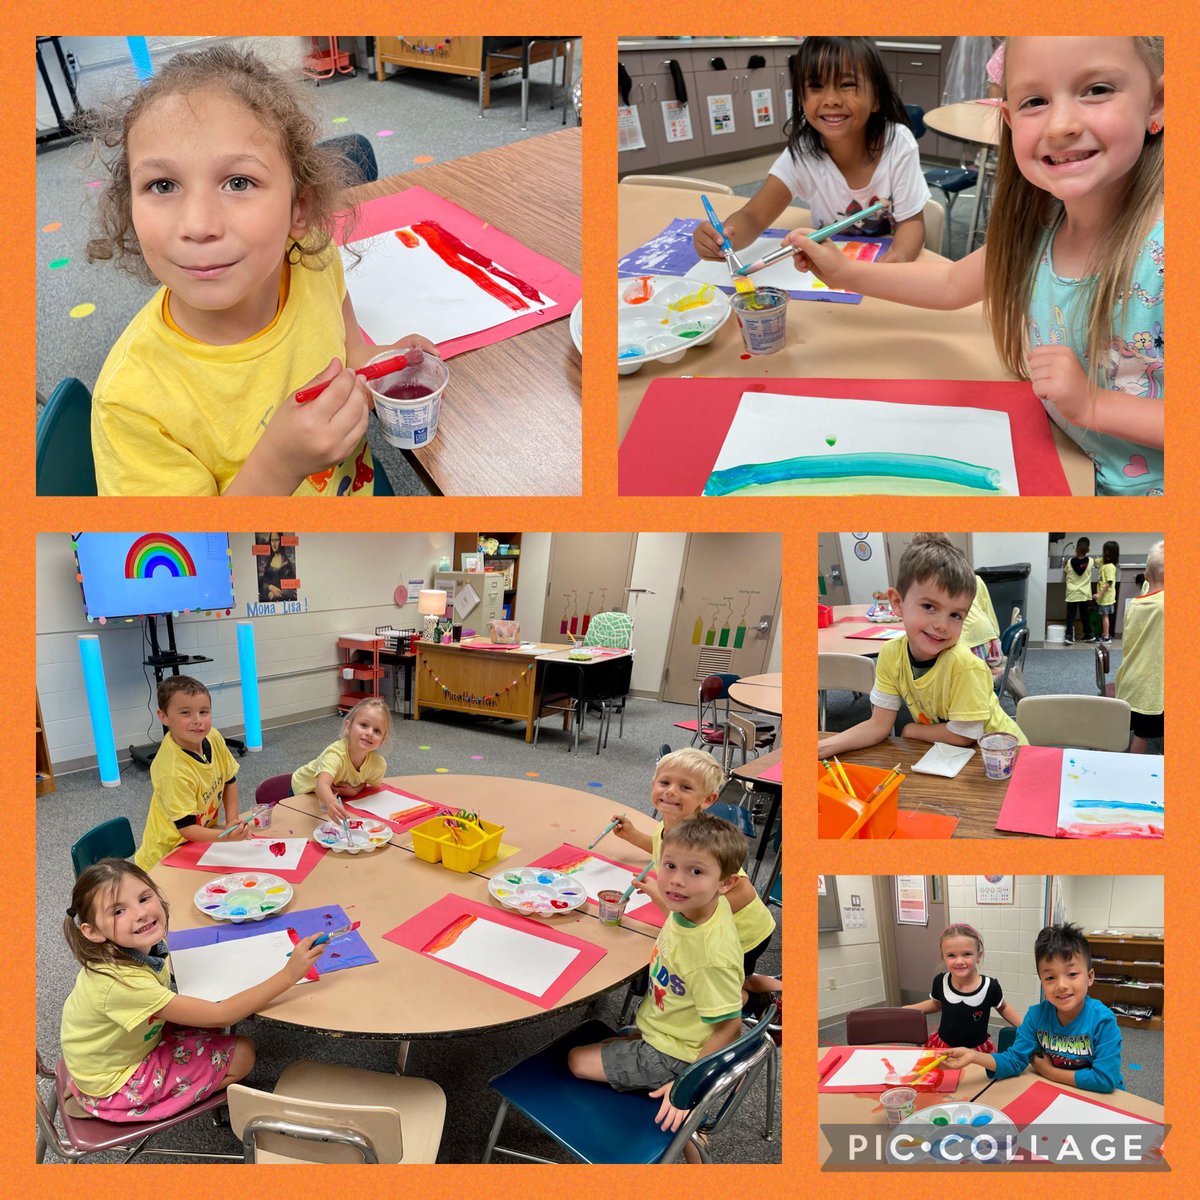 These @TSWildcats_BPS Kindergarteners got to paint for the FIRST TIME in Art this week! 🤩🎨 We worked on painting straight lines in the color of the rainbow 🌈